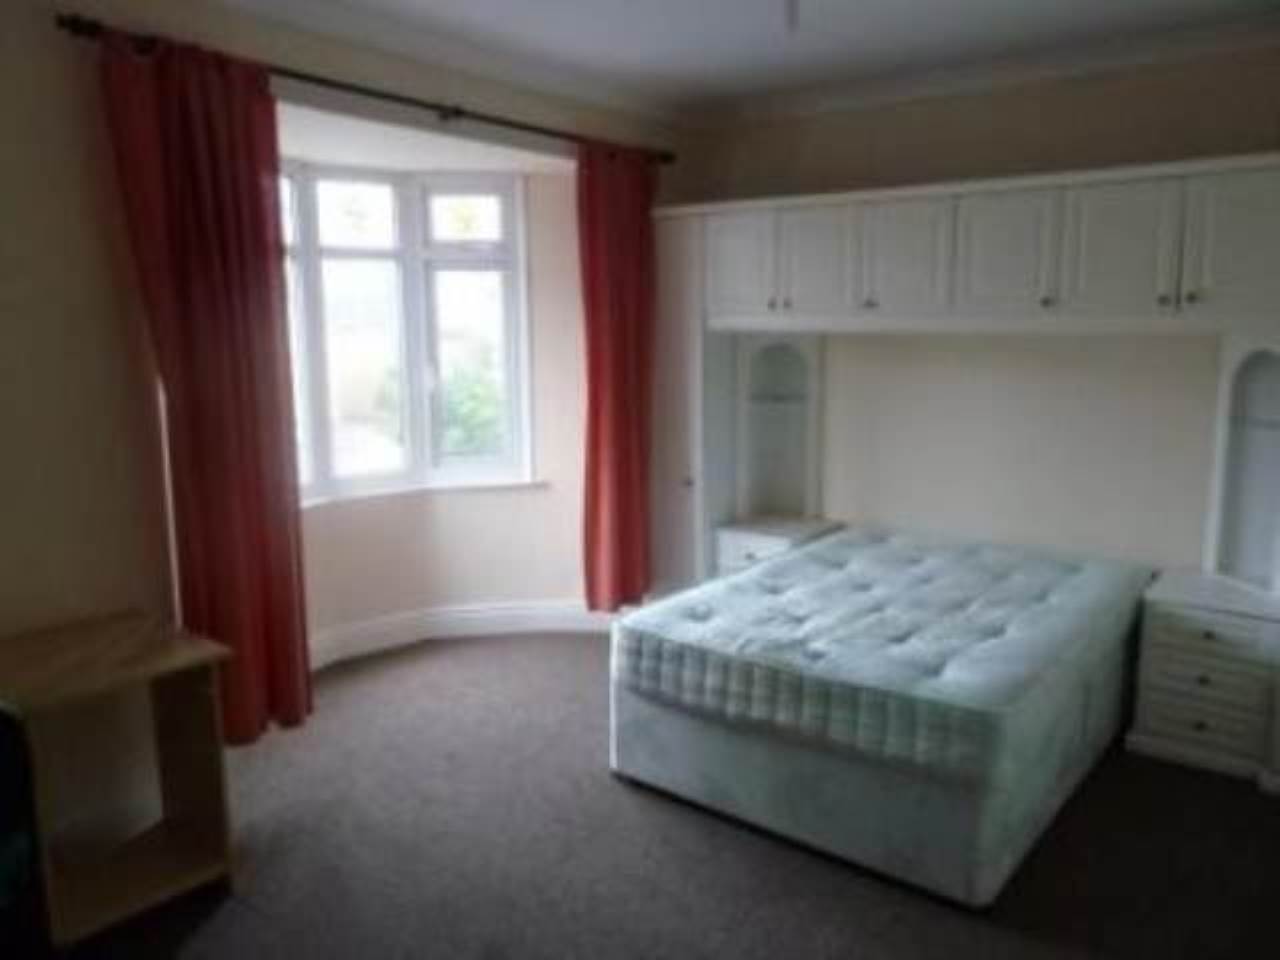 5 bed house to rent in Cromwell streets, Mount pleasant 0